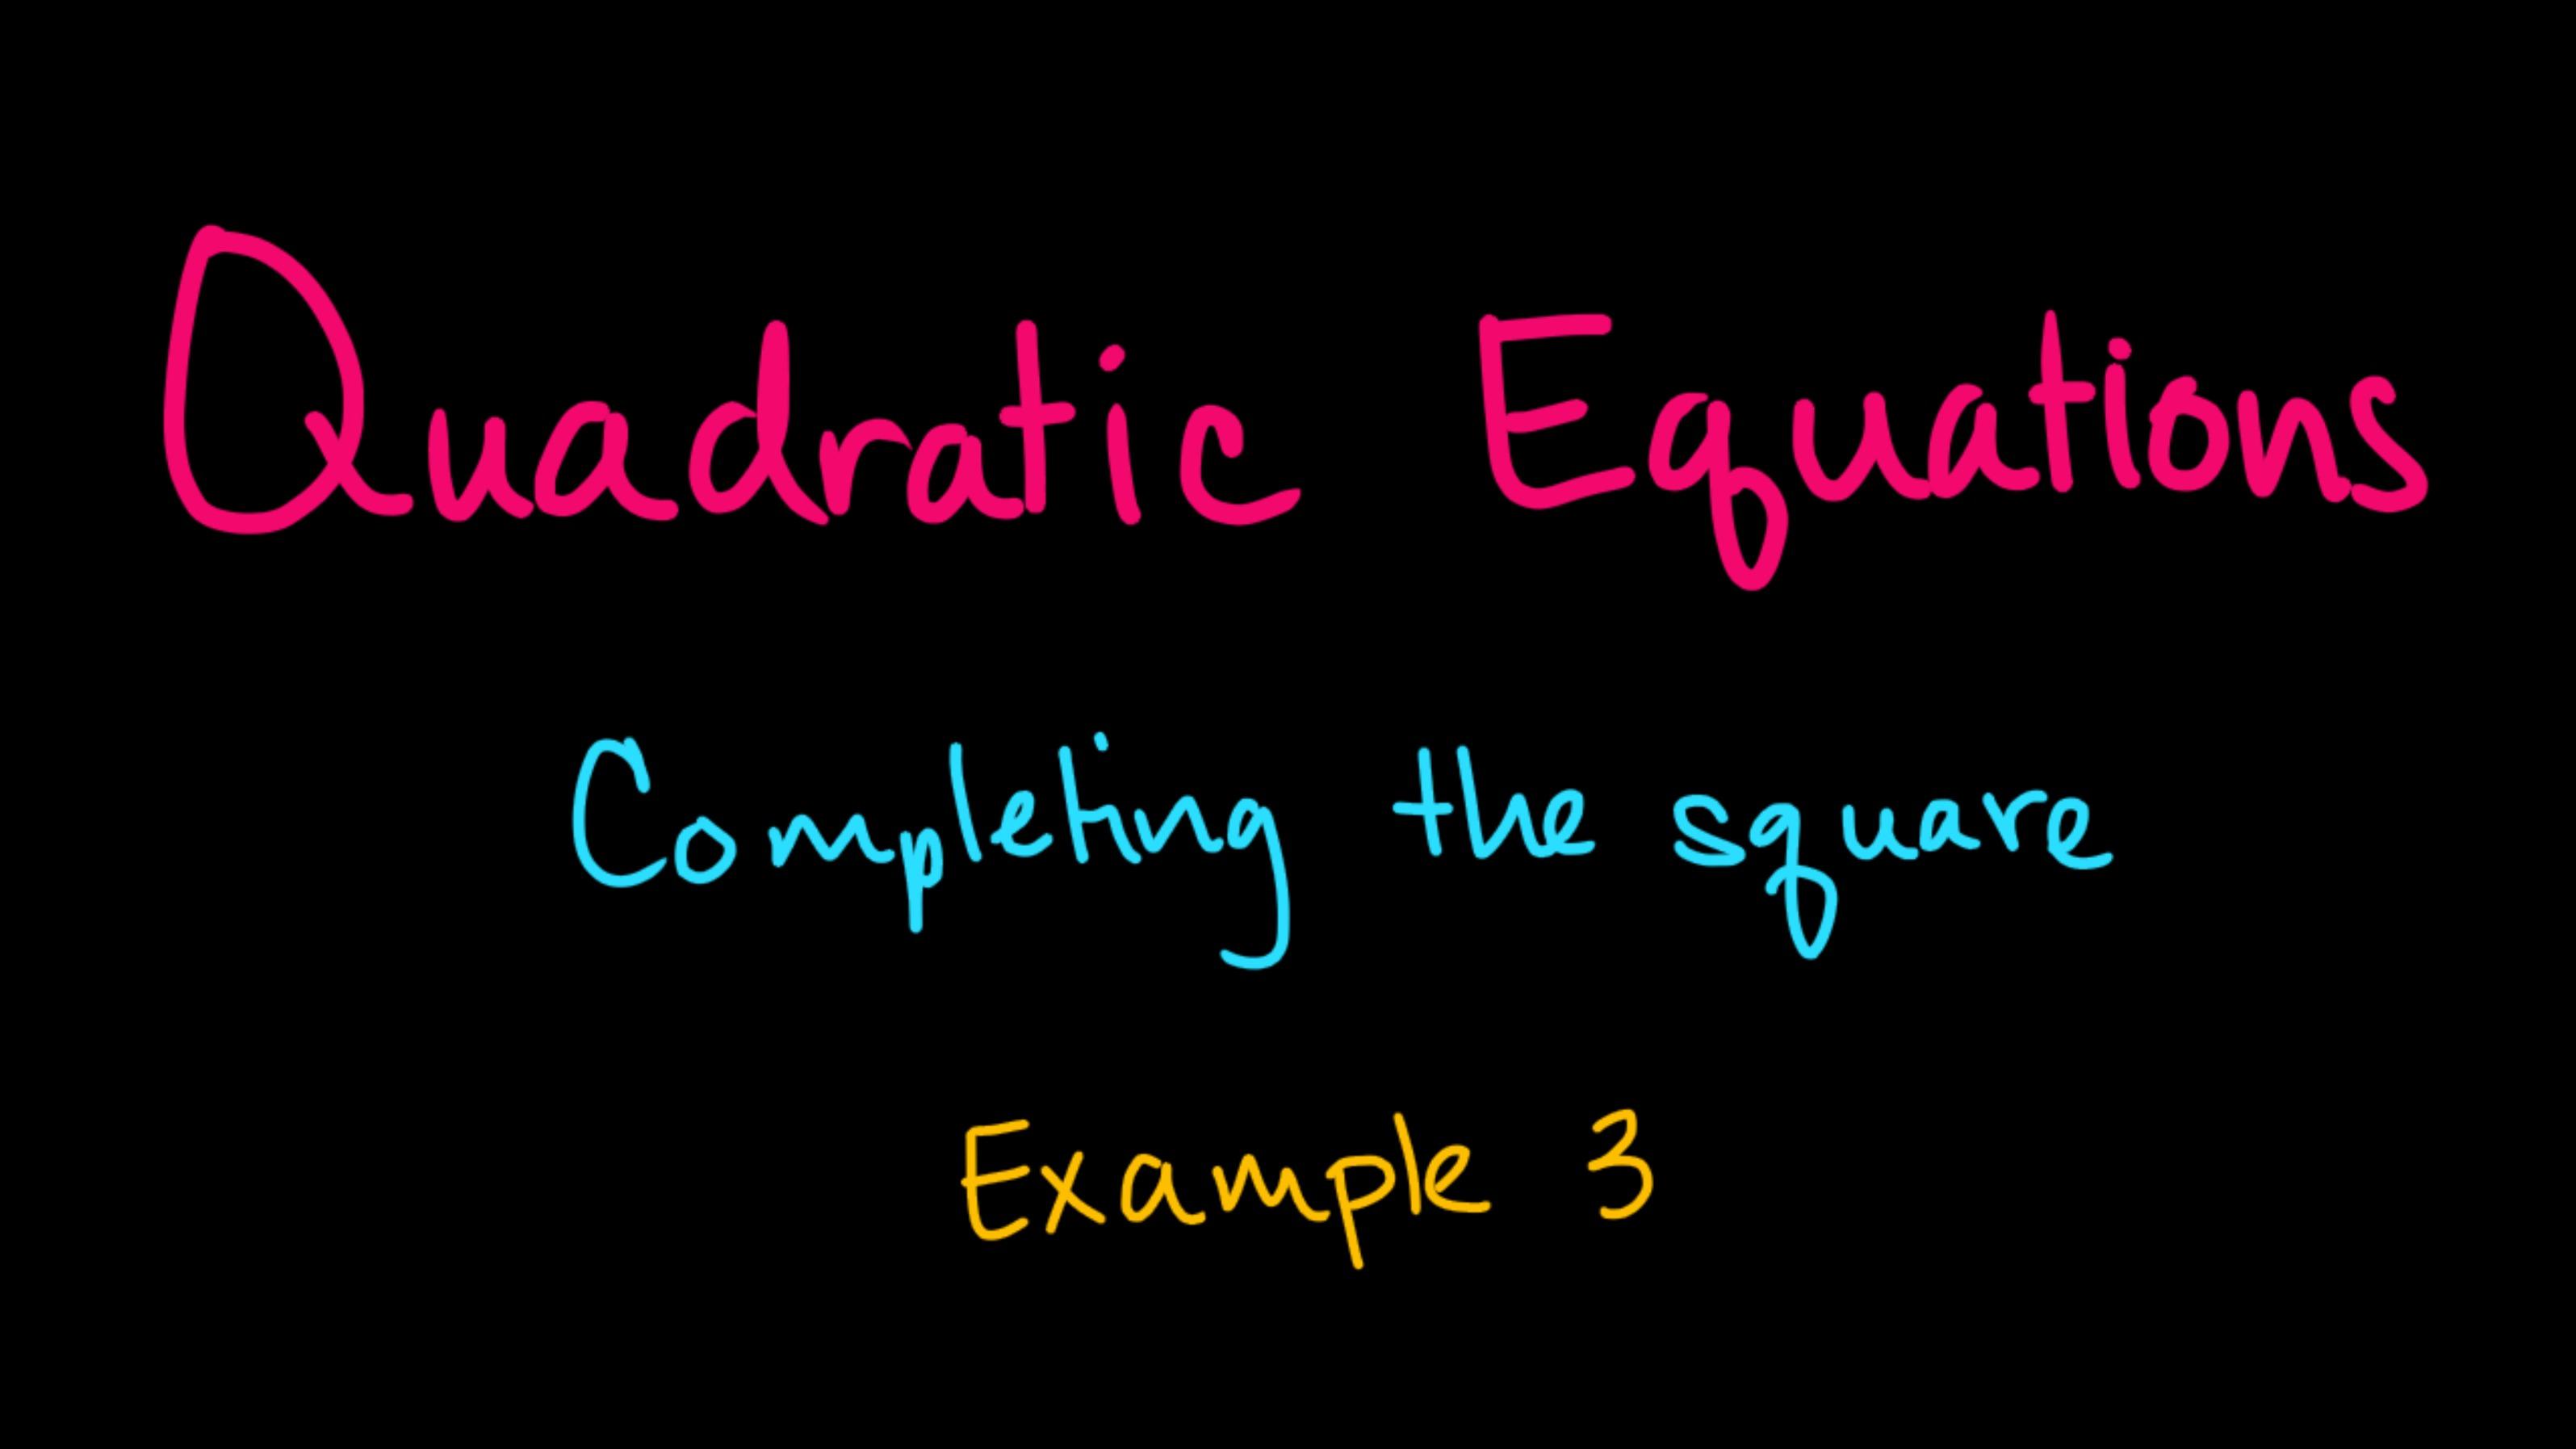 Quadratic Equations - Completing the square: Solving for the roots